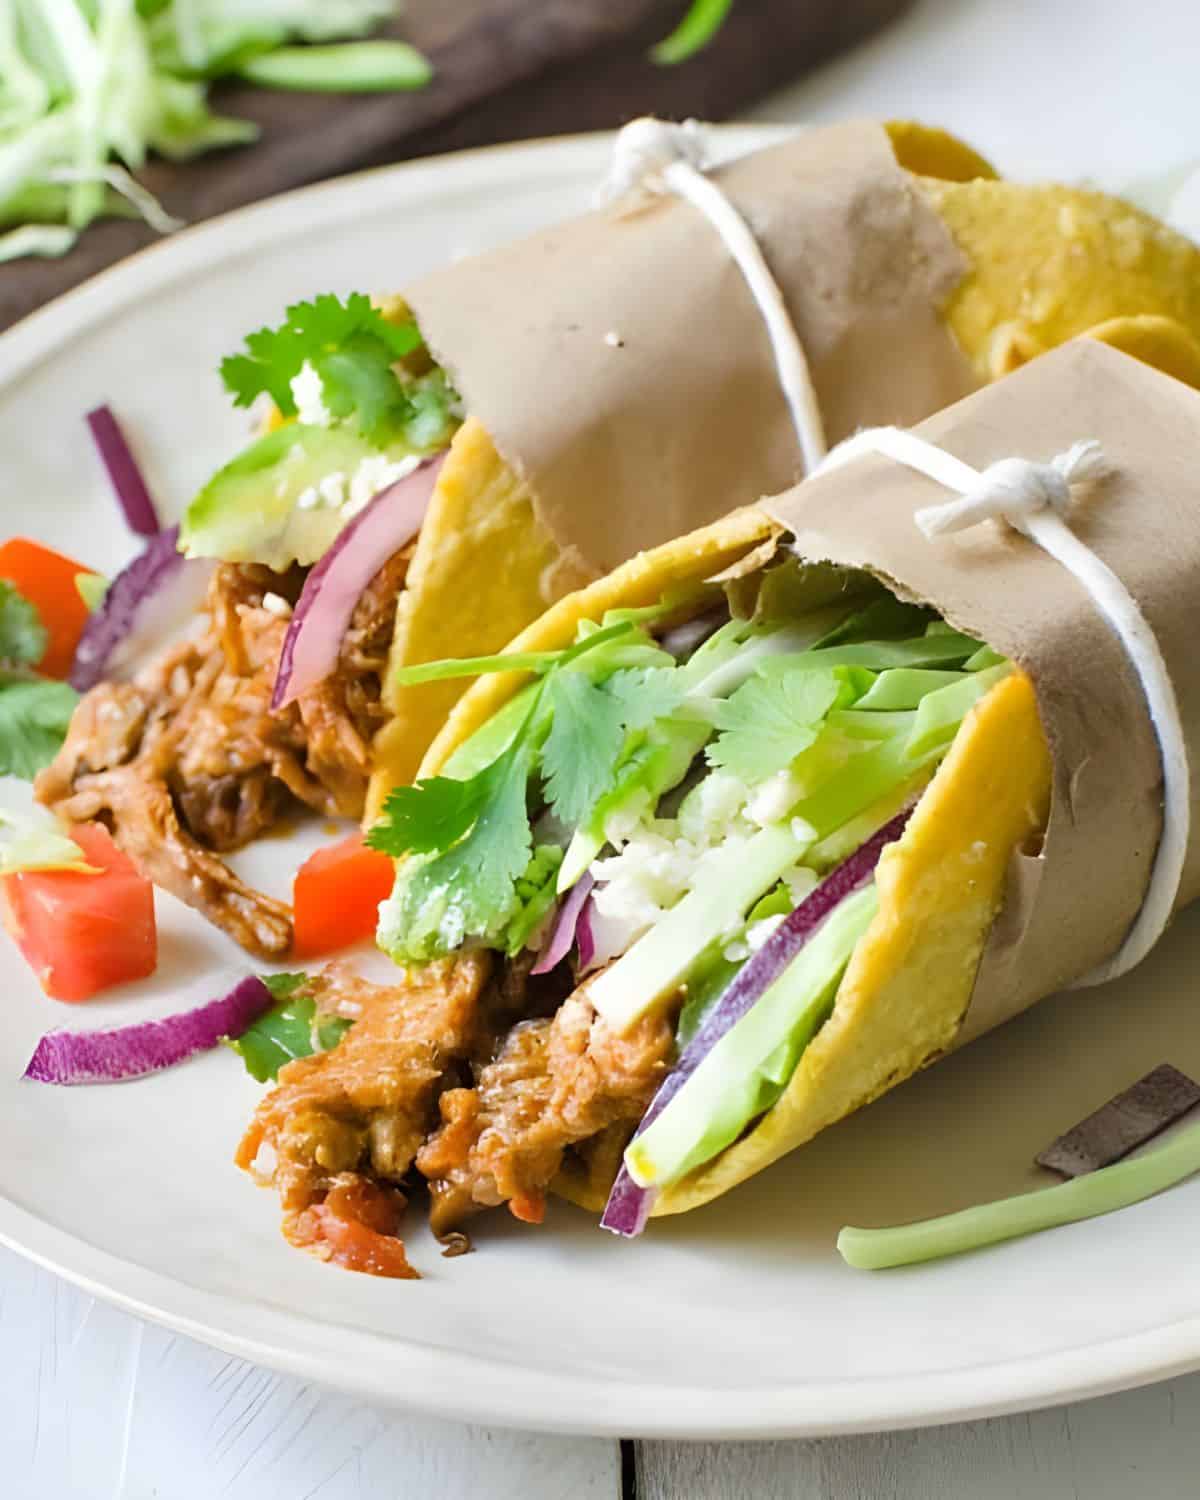 A plate of braised pork tacos with cabbage and tomatoes.